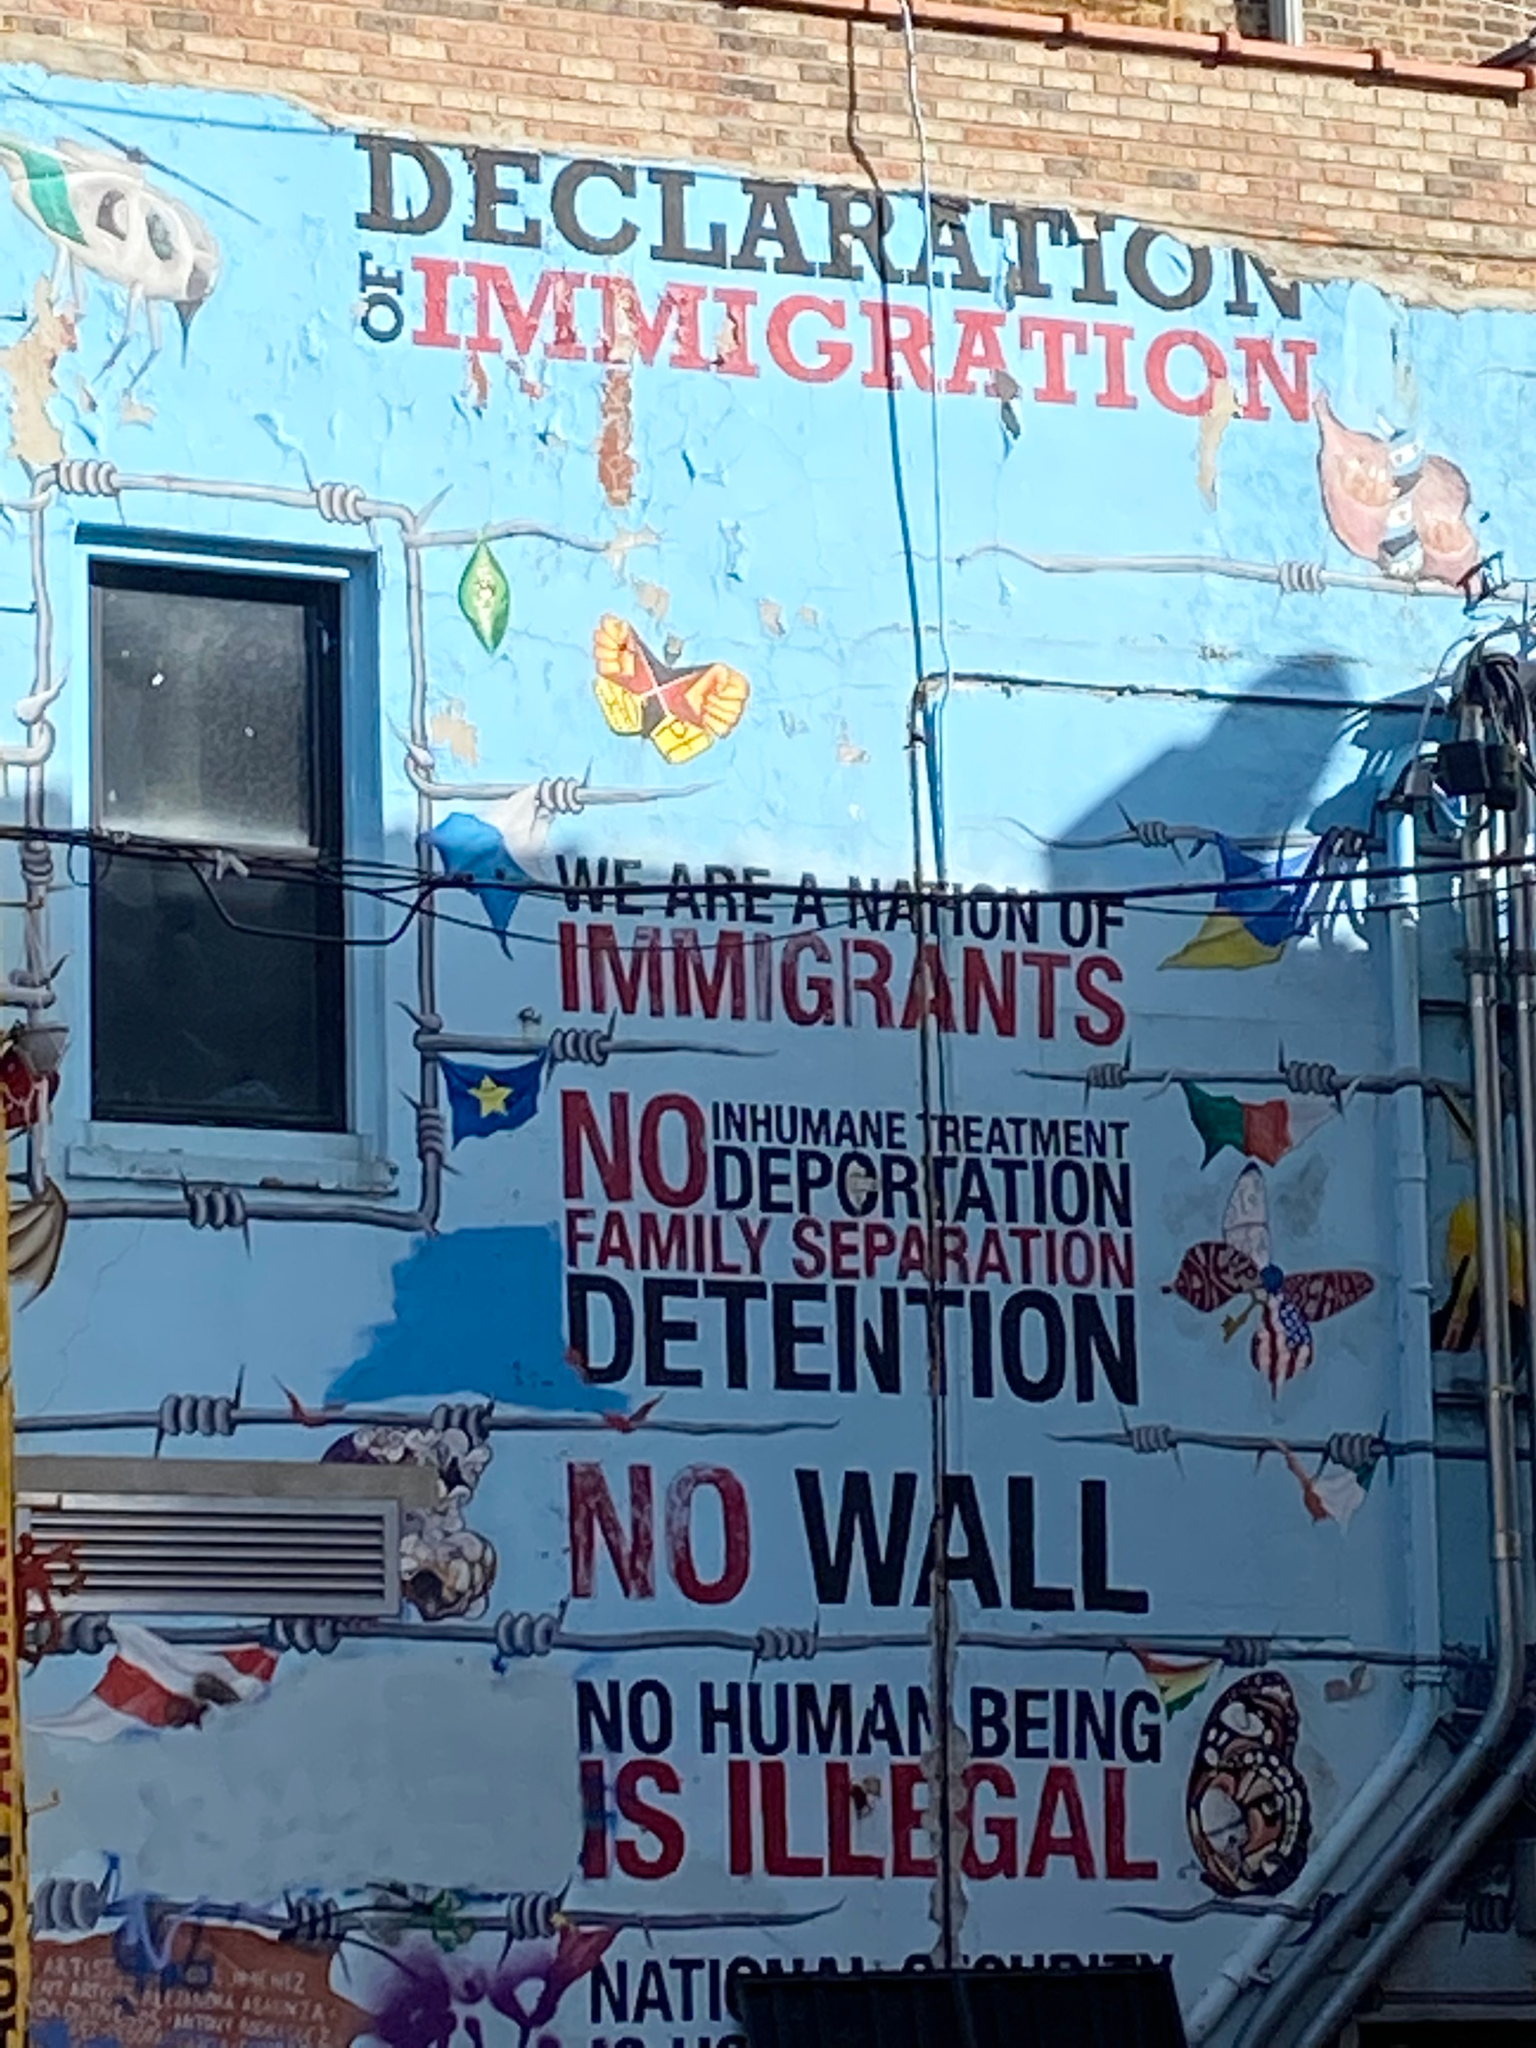 This mural is “Declaration of Immigration,” and depicts the text “Declaration of Immigration; We are a nation of immigrants; No inhumane treatment, deportation, family separation, detention; No wall; No human being is illegal.” Depicted in between these statements are barbed wire and a variety of national flags from Latin America. 